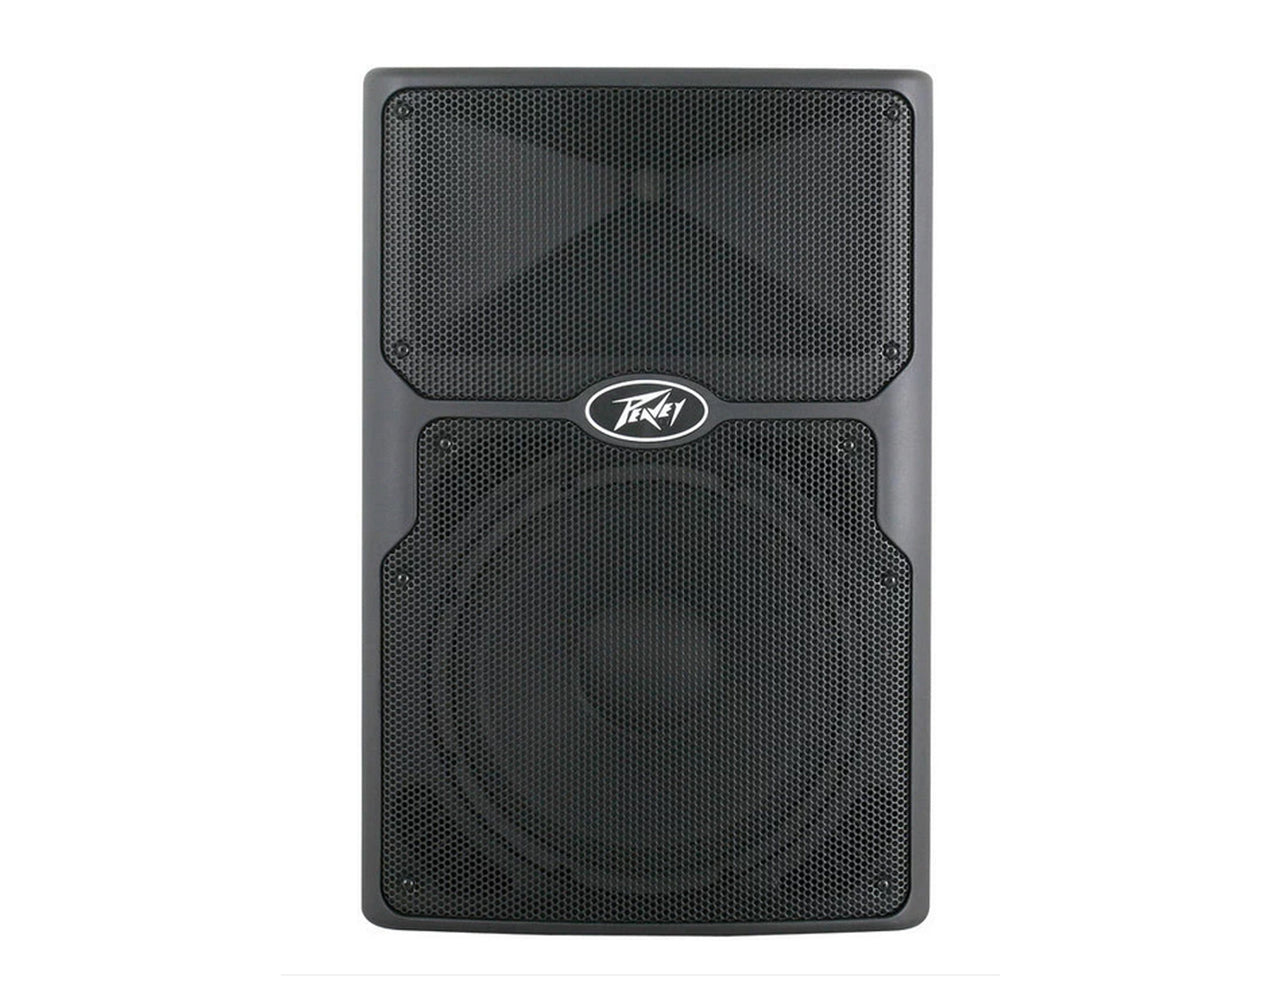 (2) PVXP15 DSP 15 inch Powered Speaker 830W 12" Powered Speaker with 1.4" Compression Driver,+ Free Mr. Dj Speaker Stands+XLR Cable